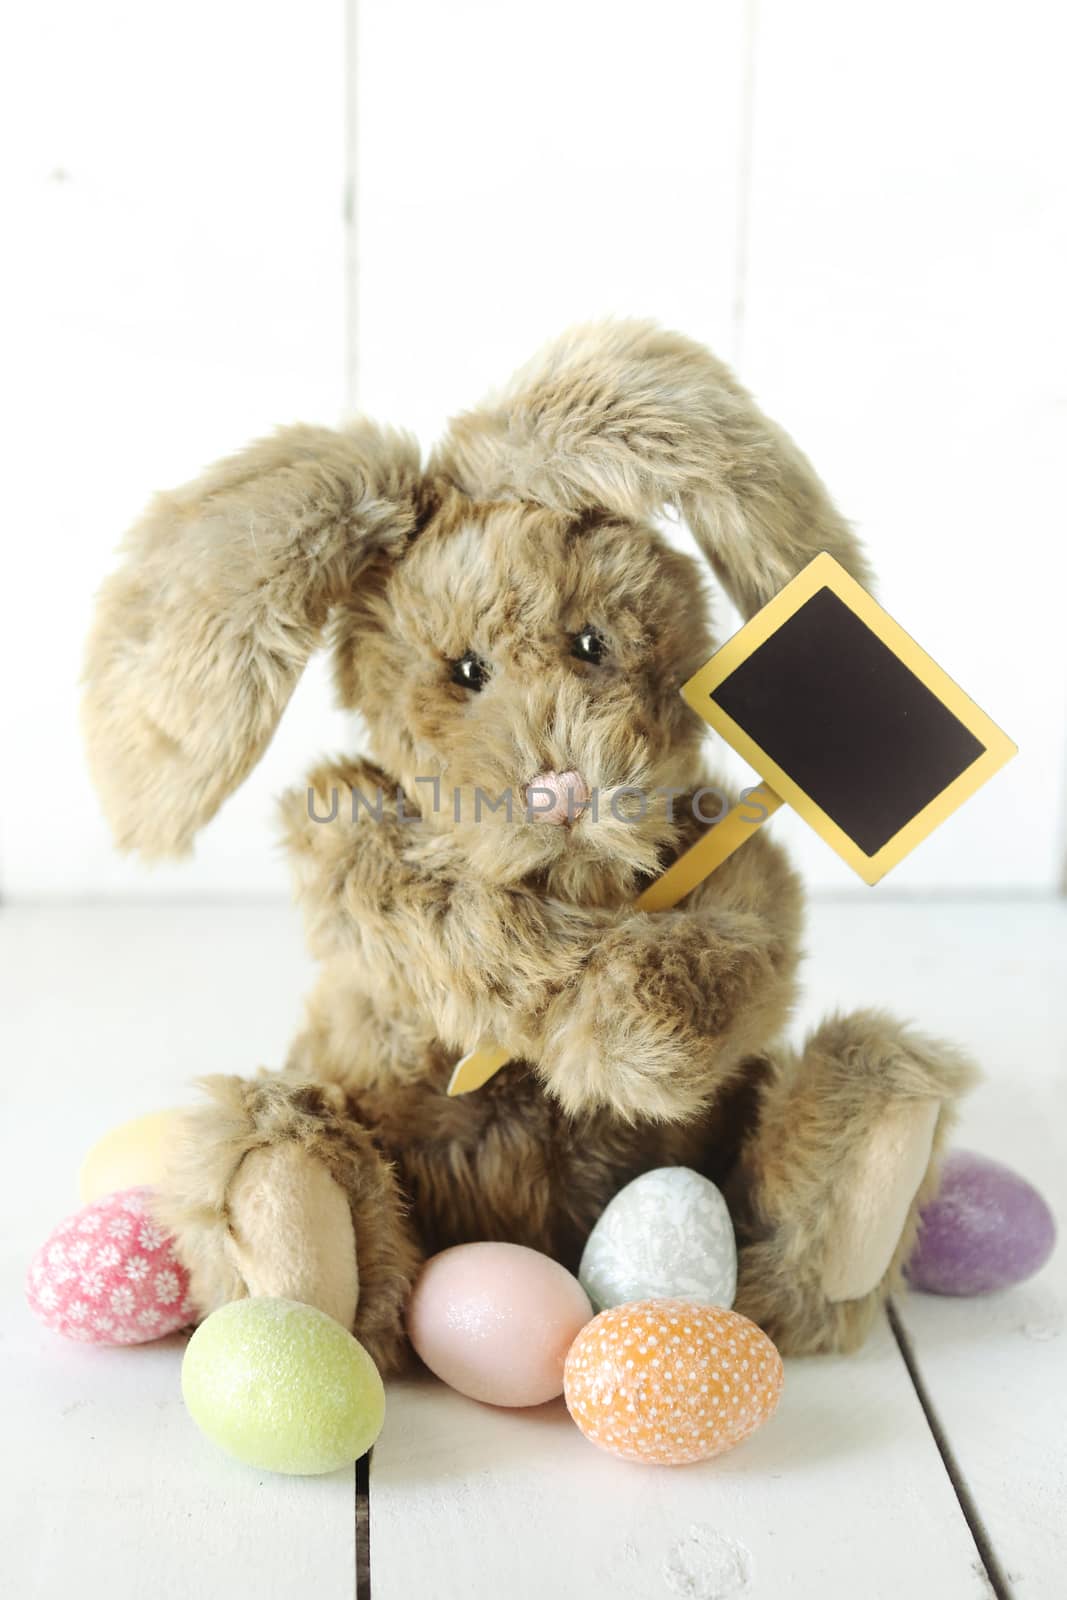 Adorable Easter Bunny Themed Holiday Occasion Image